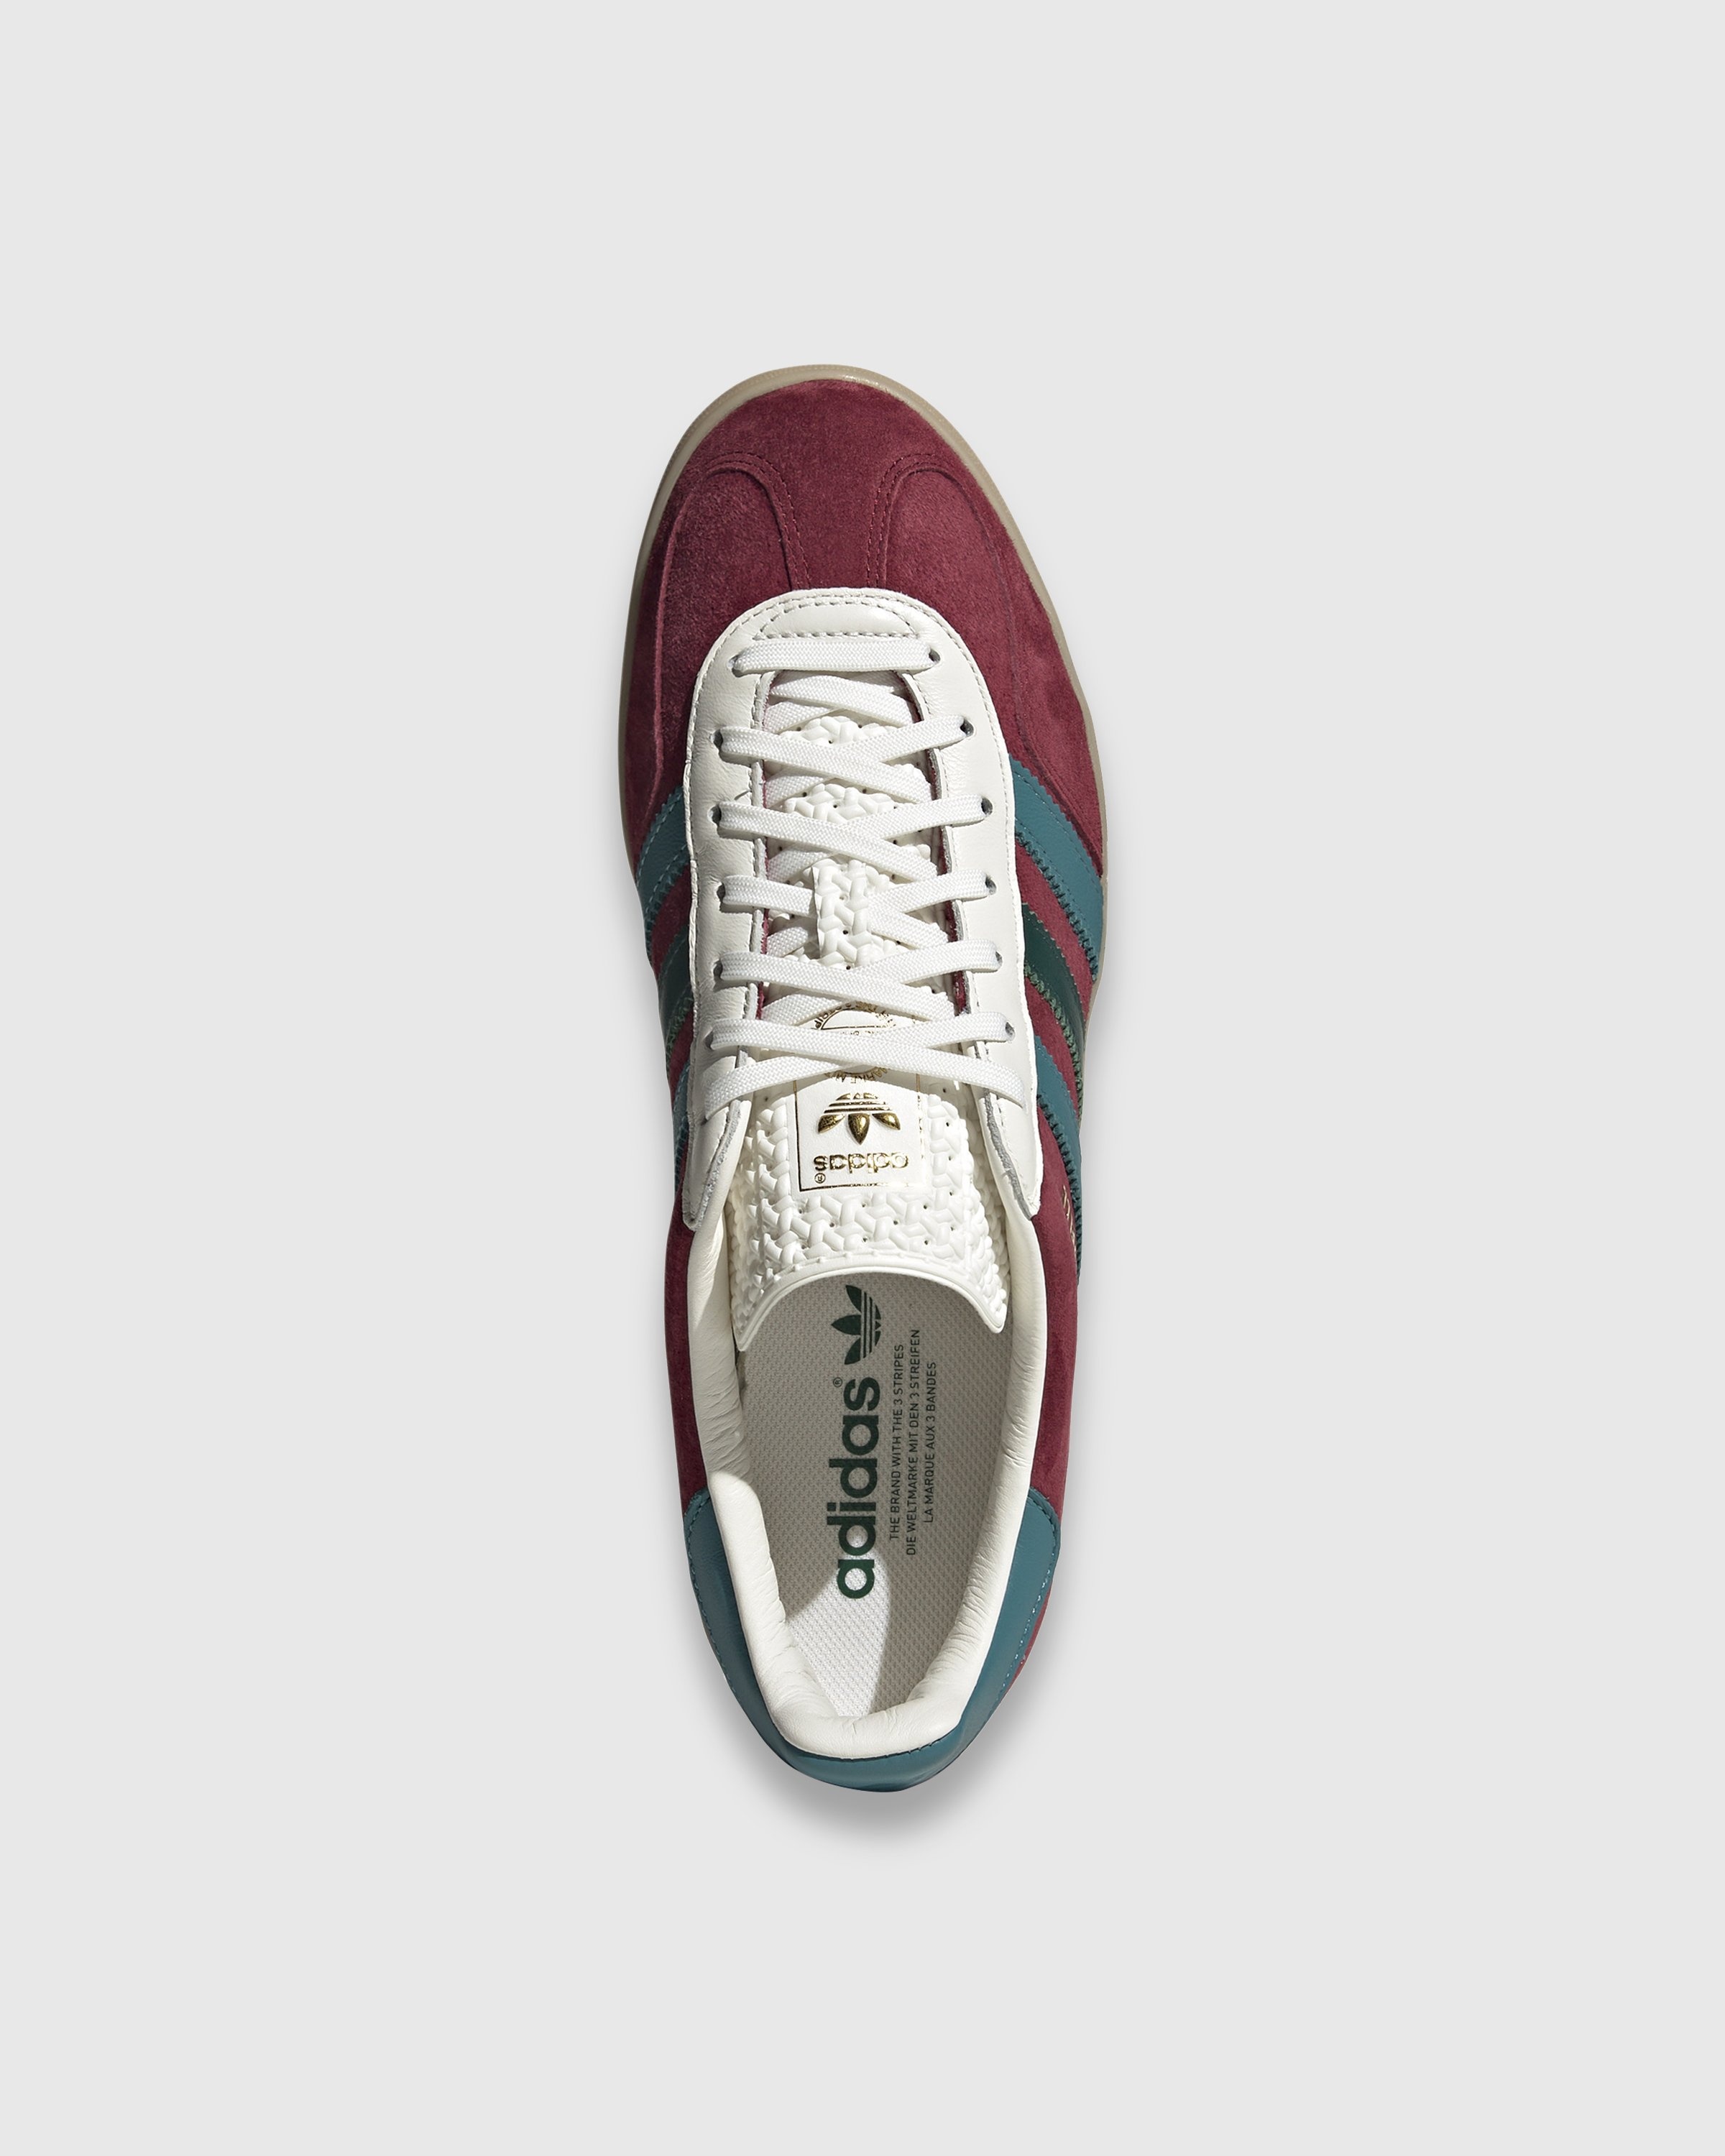 Adidas – adidas – Gazelle Core Burgundy/Green - Sneakers - Red - Image 5